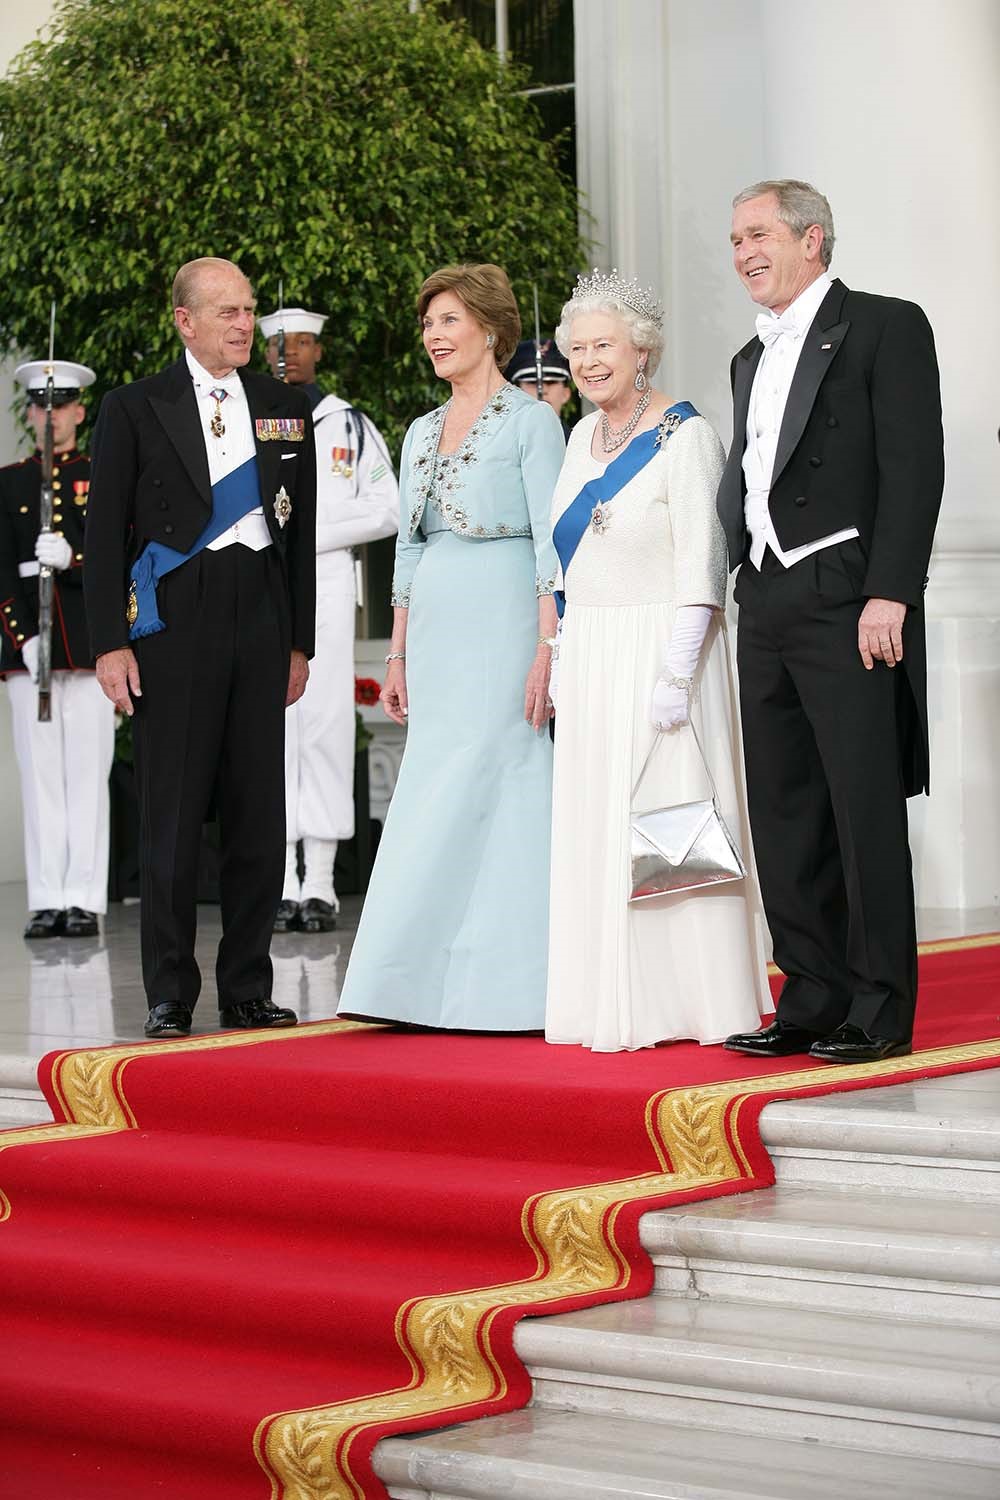 President George W. Bush and Mrs. Laura Bush Welcome Her Majesty Queen Elizabeth II and His Royal Highness The Prince Philip, Duke of Edinburgh to the White House, May 7, 2007.